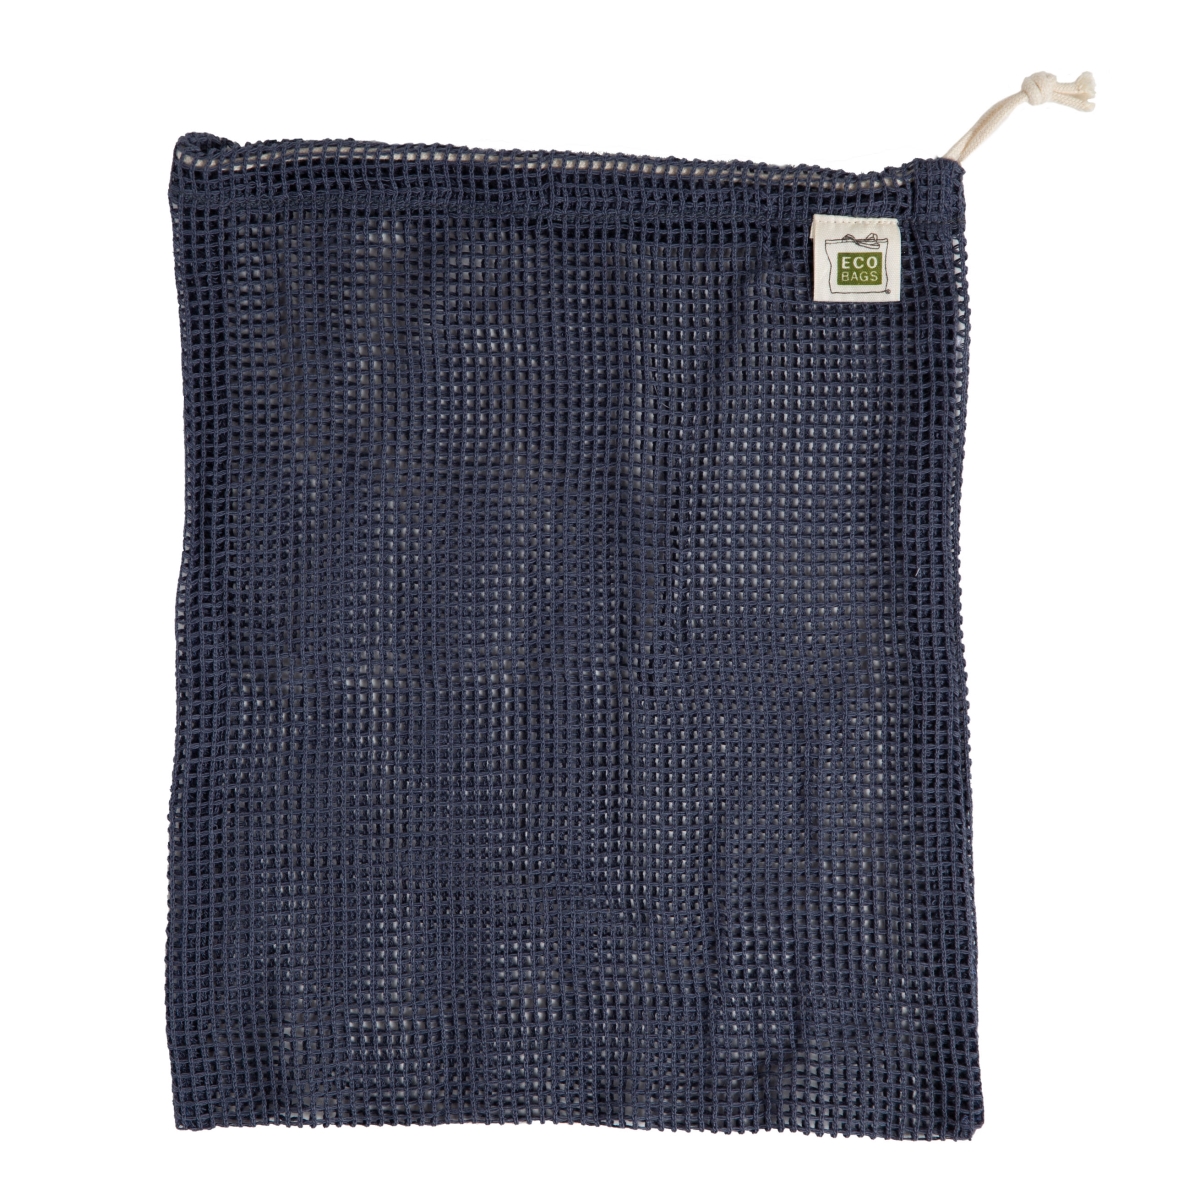 Picture of Eco-Bags 235995 10 x 12 in. Storm Blue Net Drawstring Reusable Bags